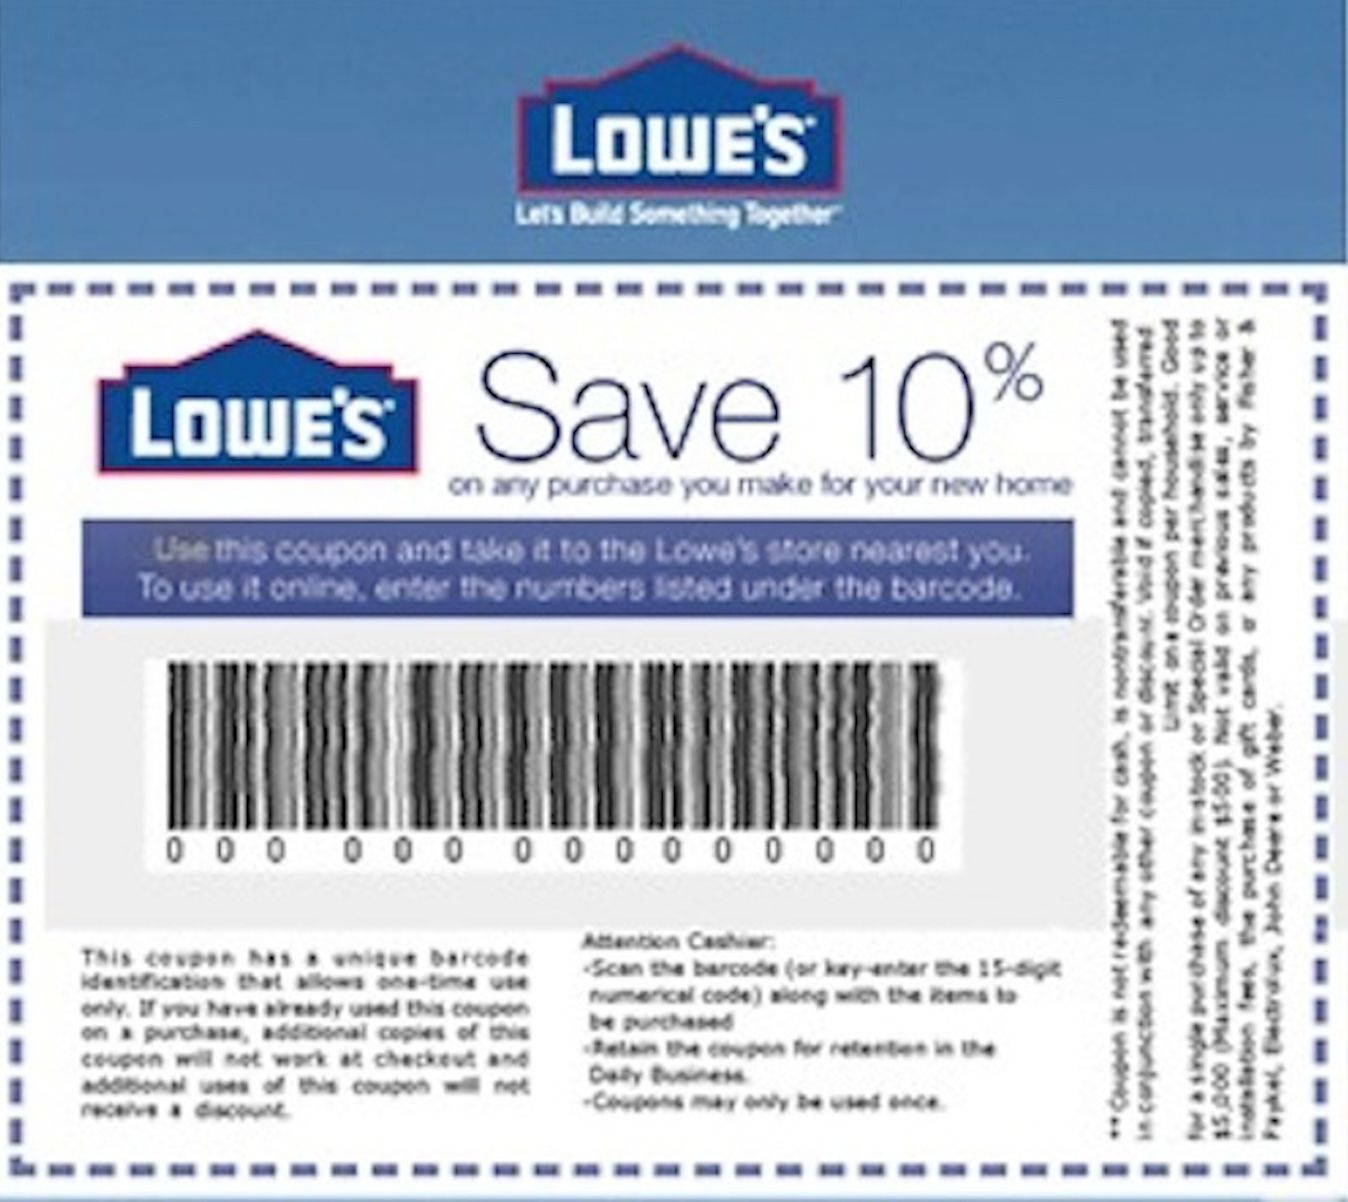 lowes-20-off-100-printable-1coupon-10-seconds-delivery-in